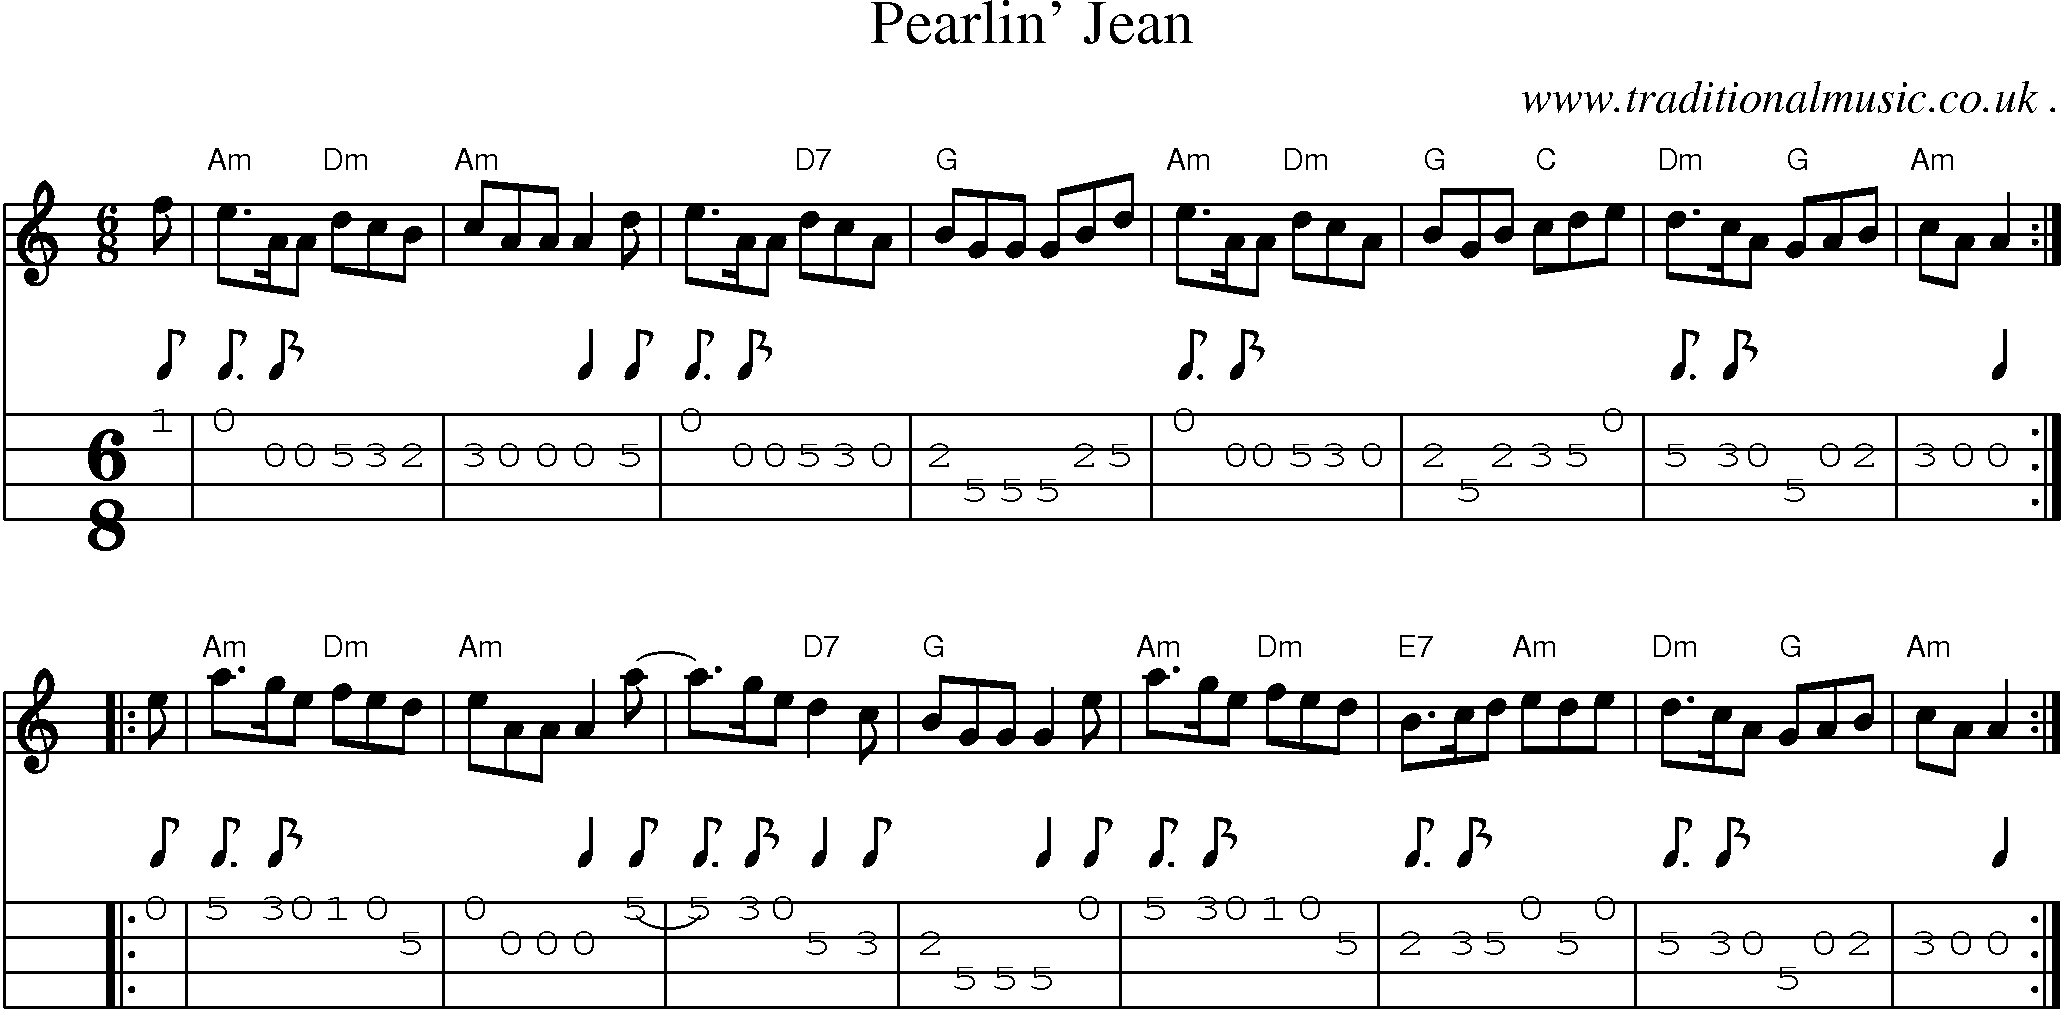 Sheet-music  score, Chords and Mandolin Tabs for Pearlin Jean